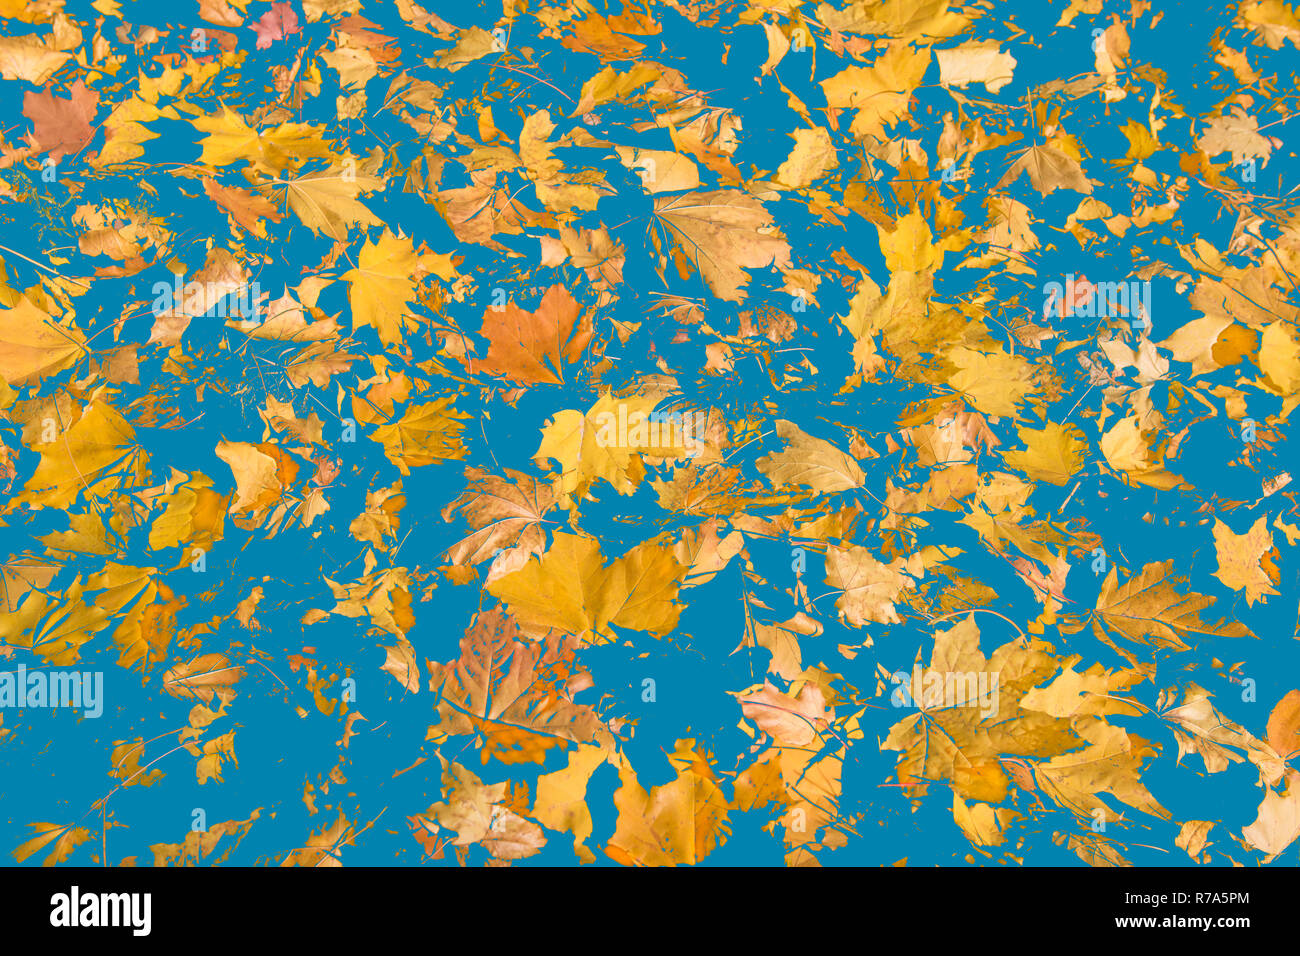 Abstract leaves pattern in yellow, orange, blue hues with an autumnal feel. Autumn maple leaves. Background of maple foliage, toned Stock Photo